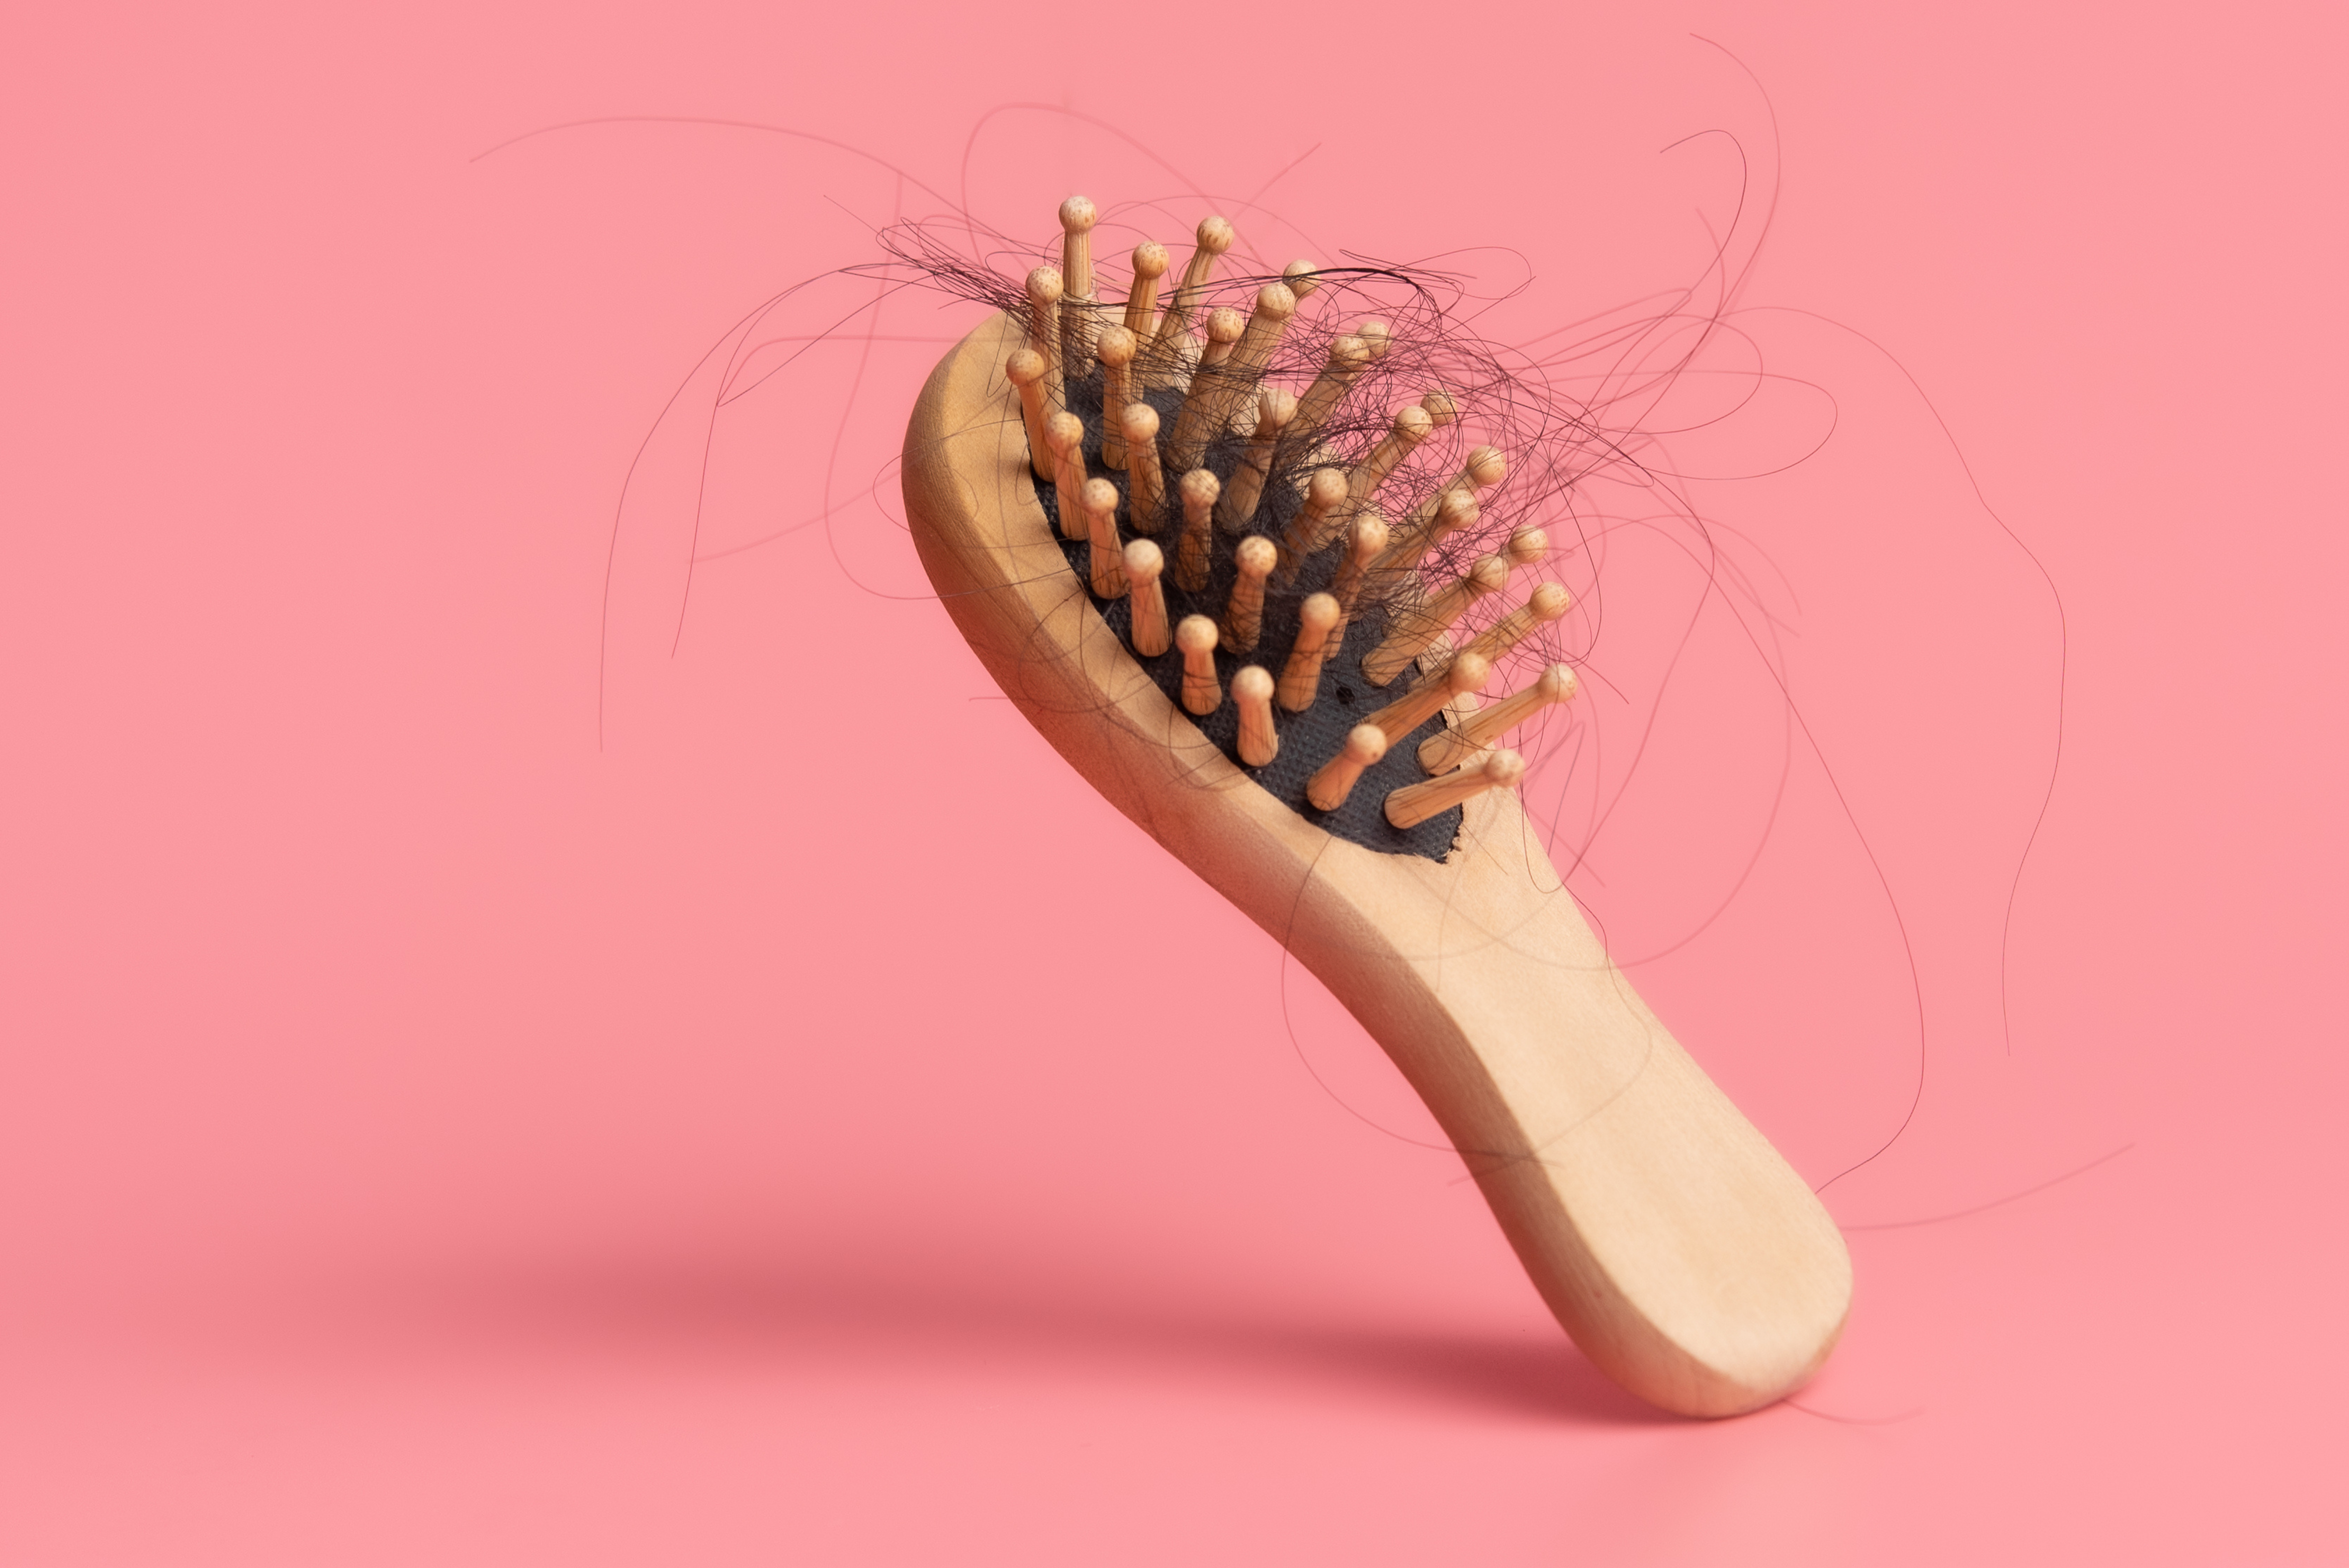 Hair Shedding: What Is It & How to Stop It?